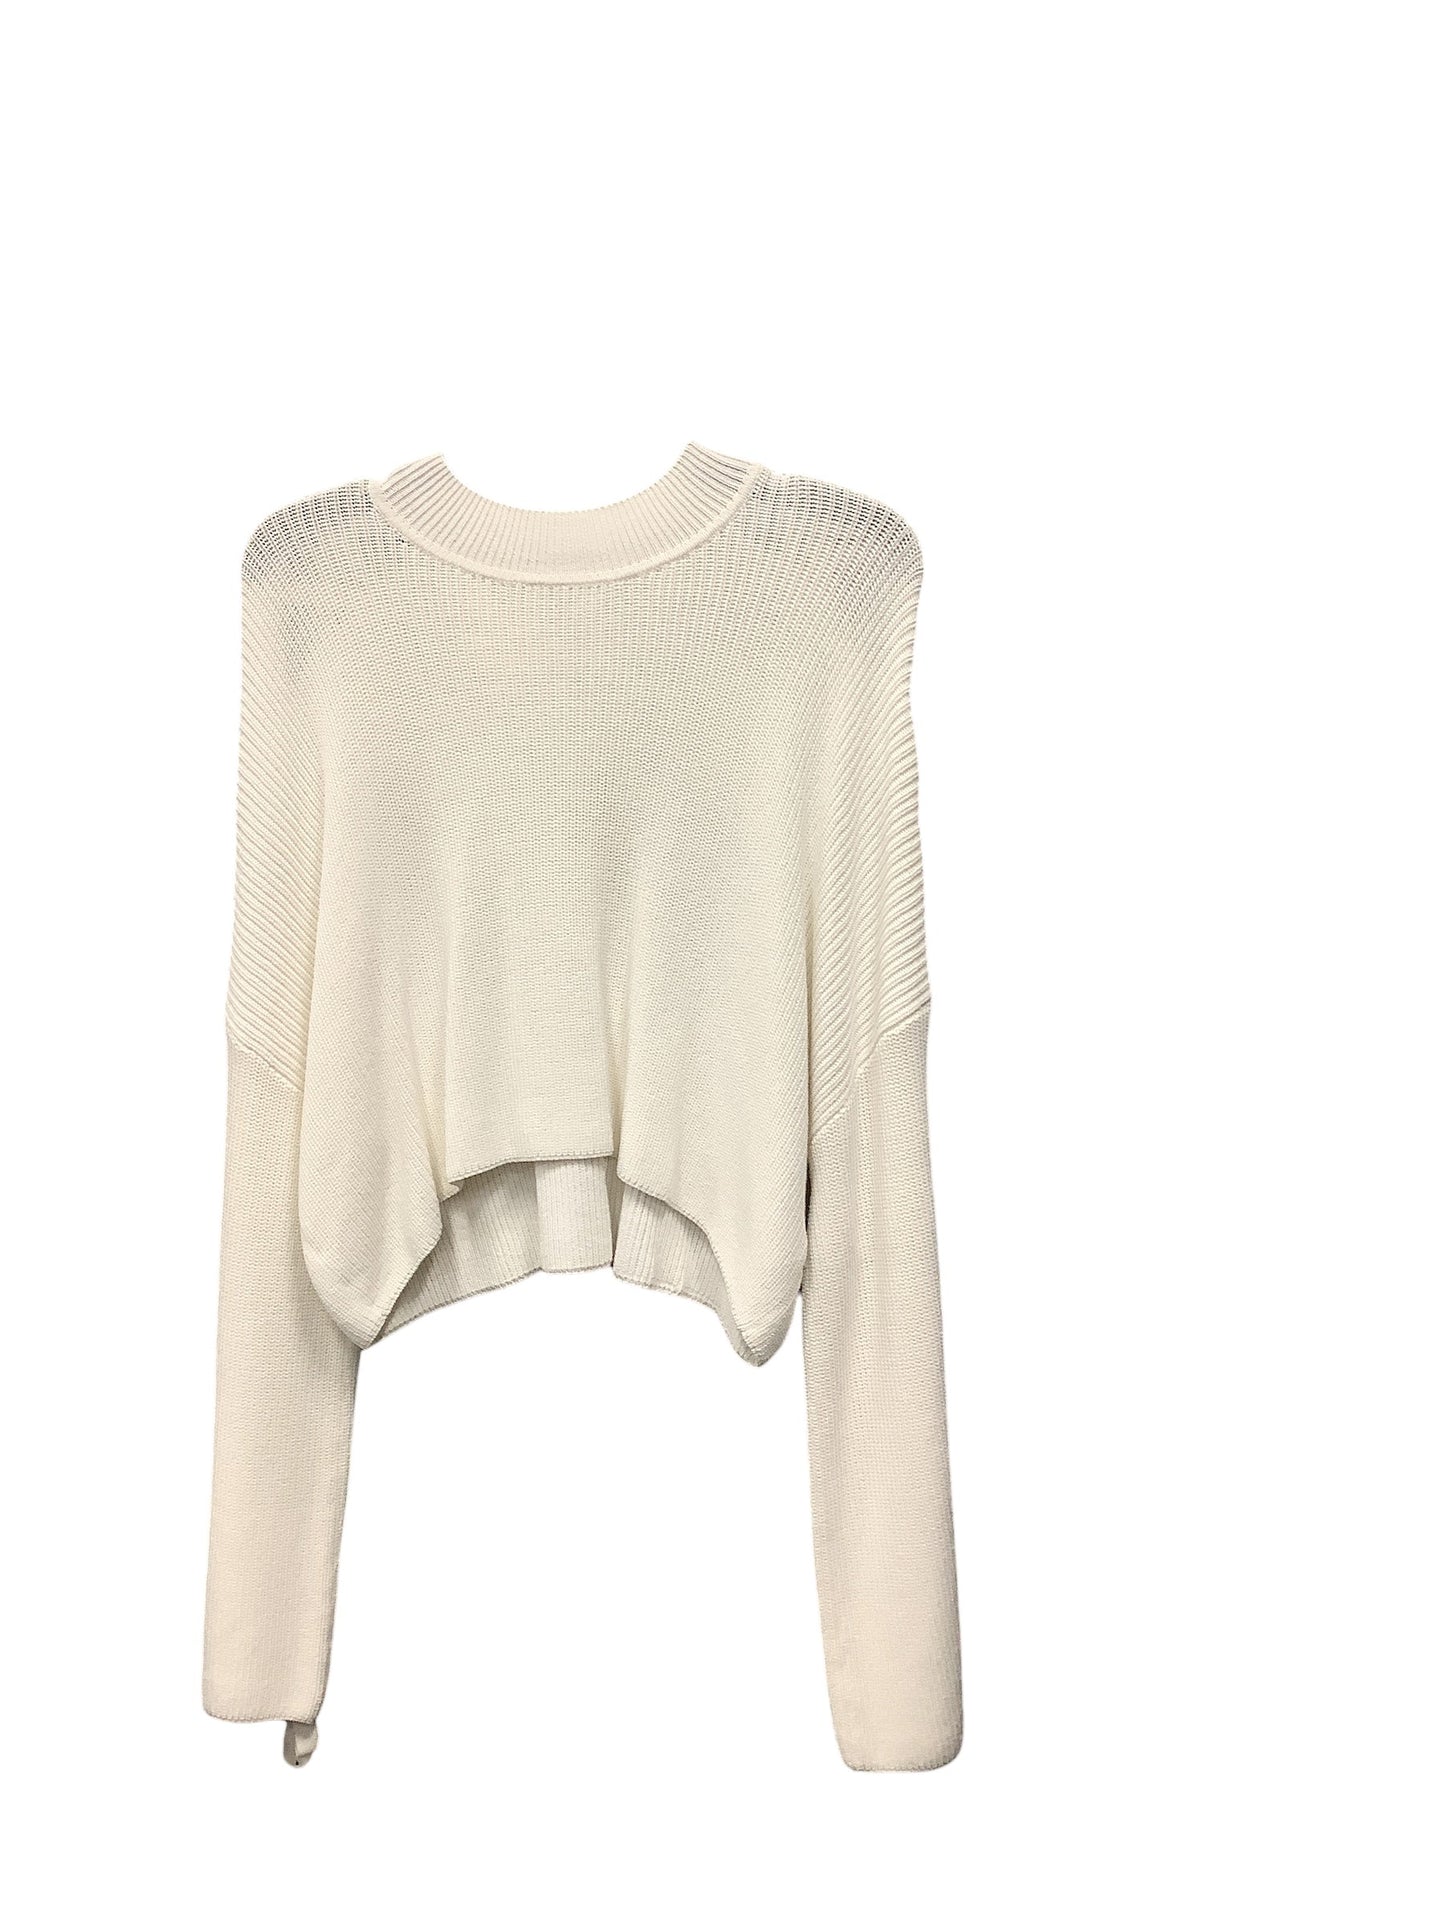 Ivory Sweater Wilfred, Size 2